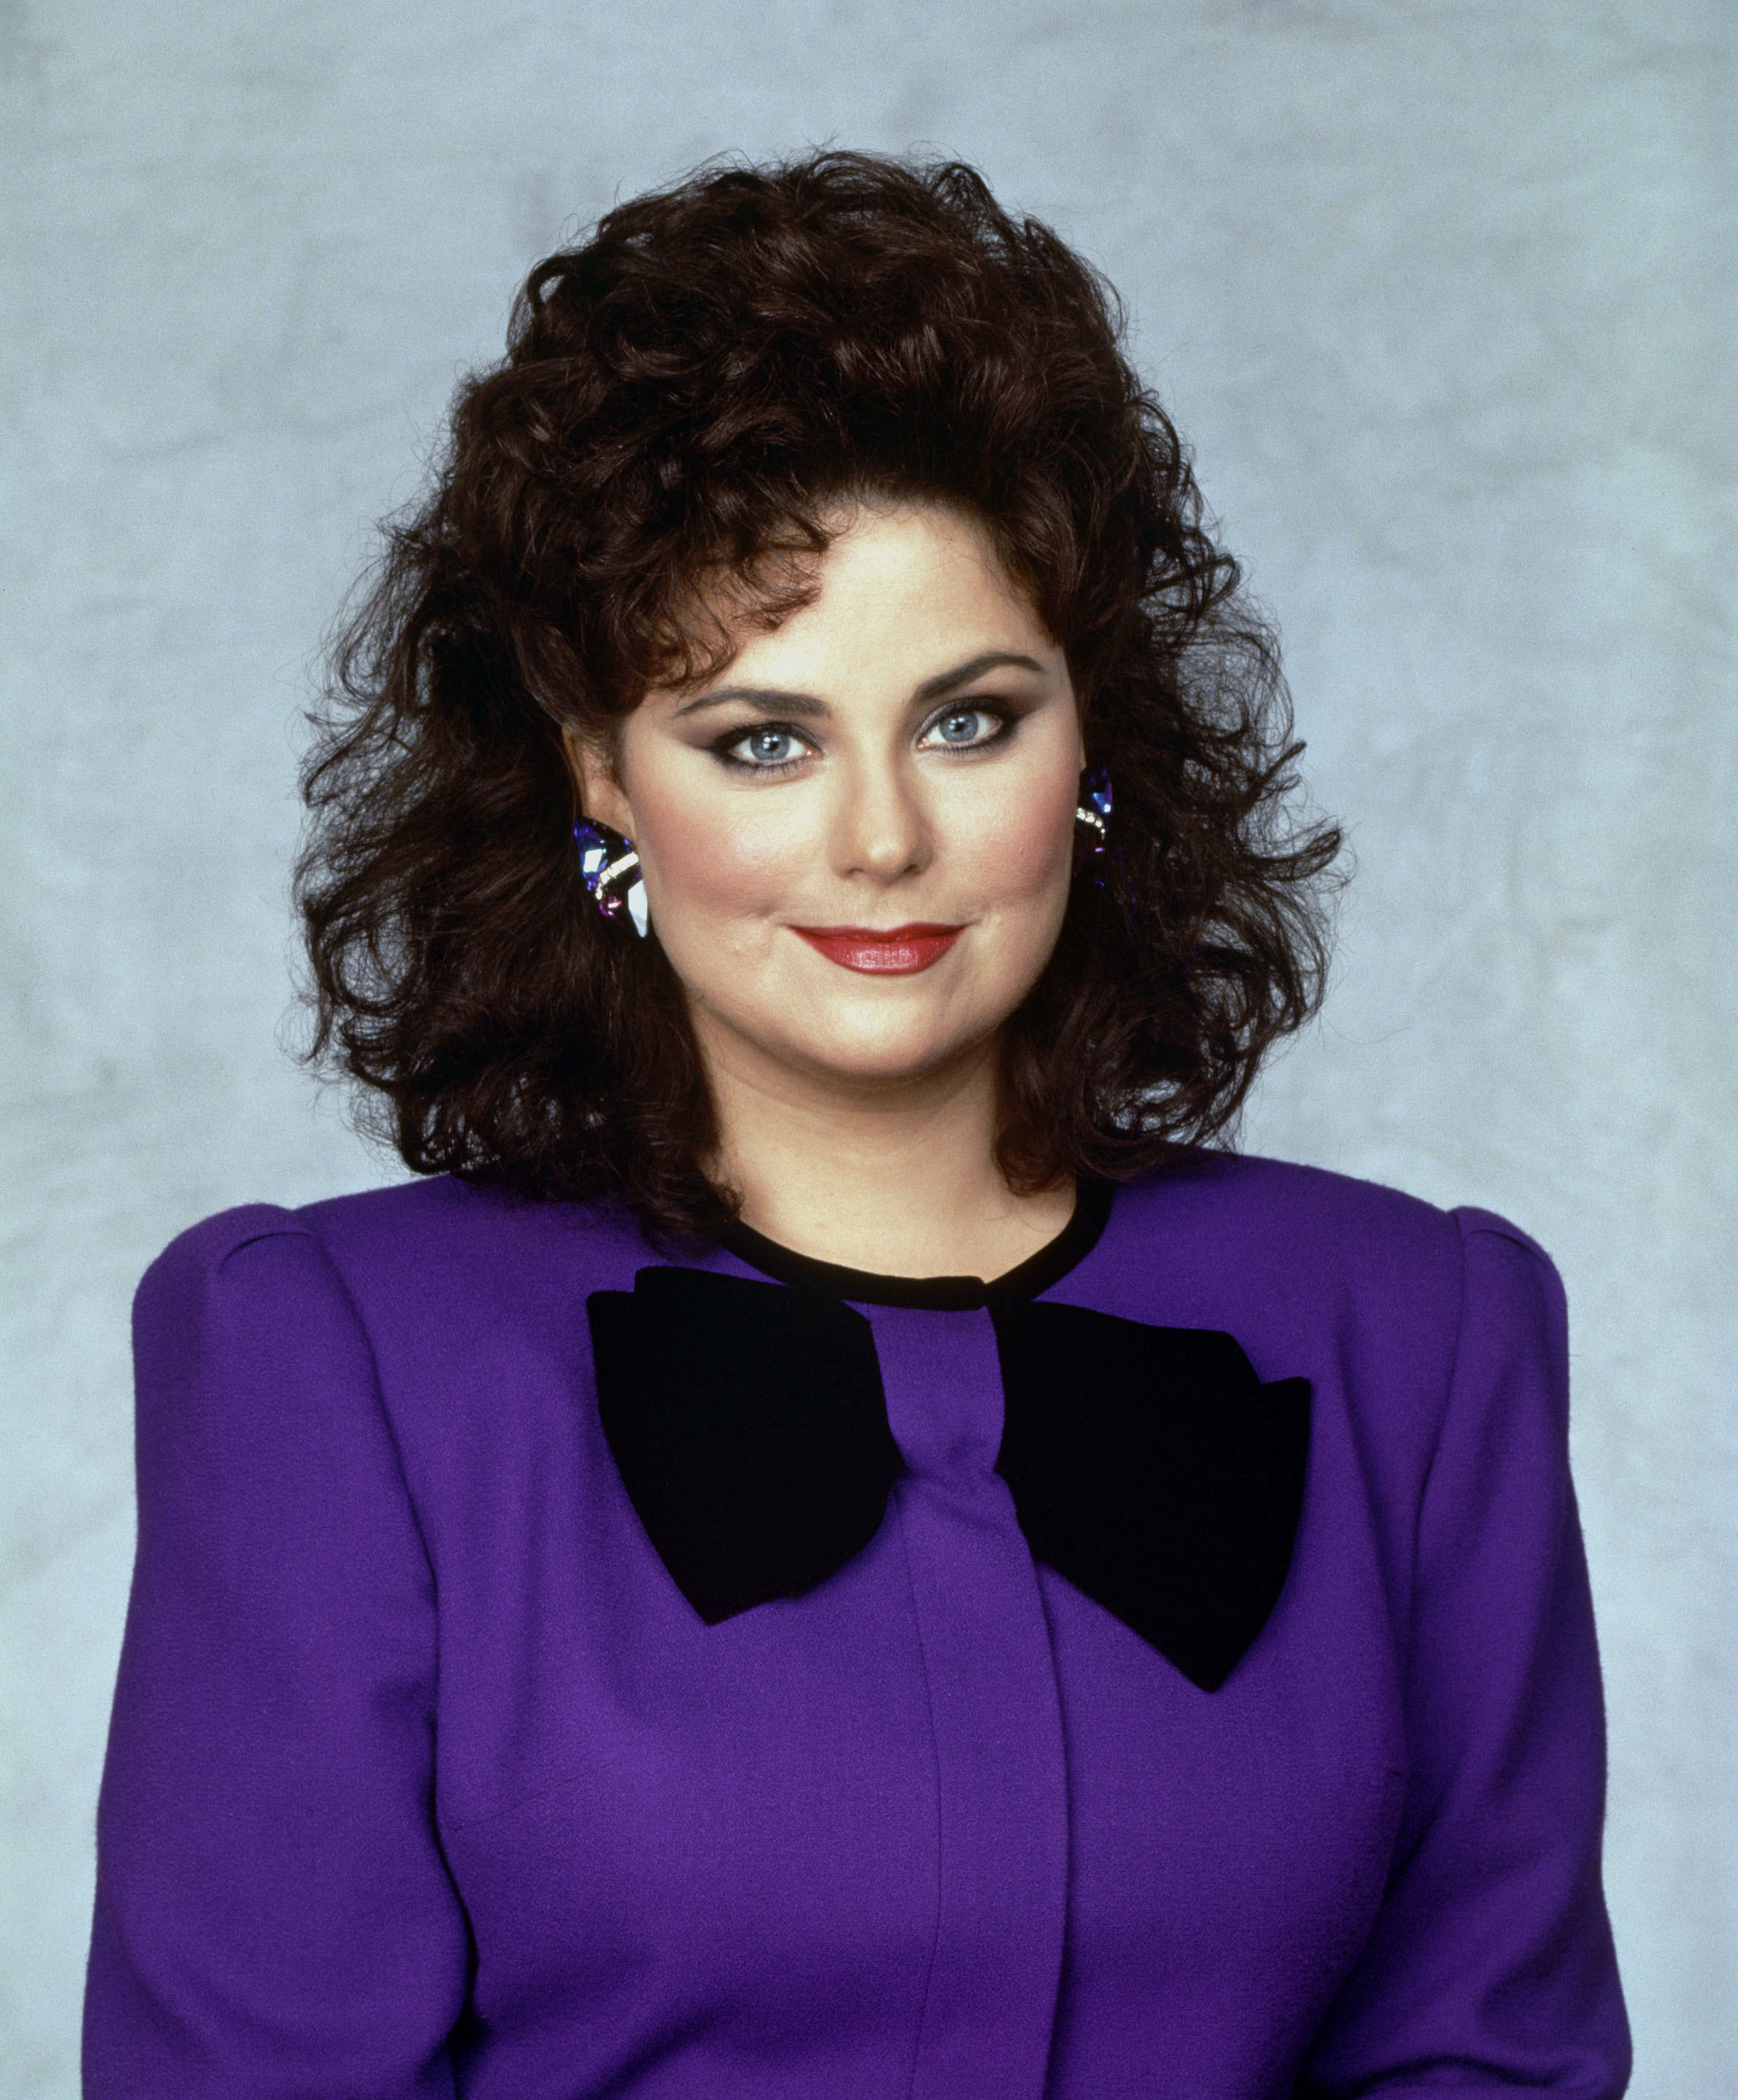 Designing Women" cast member Delta Burke as Suzanne Sugarbaker, 1990. | Source: Getty Images